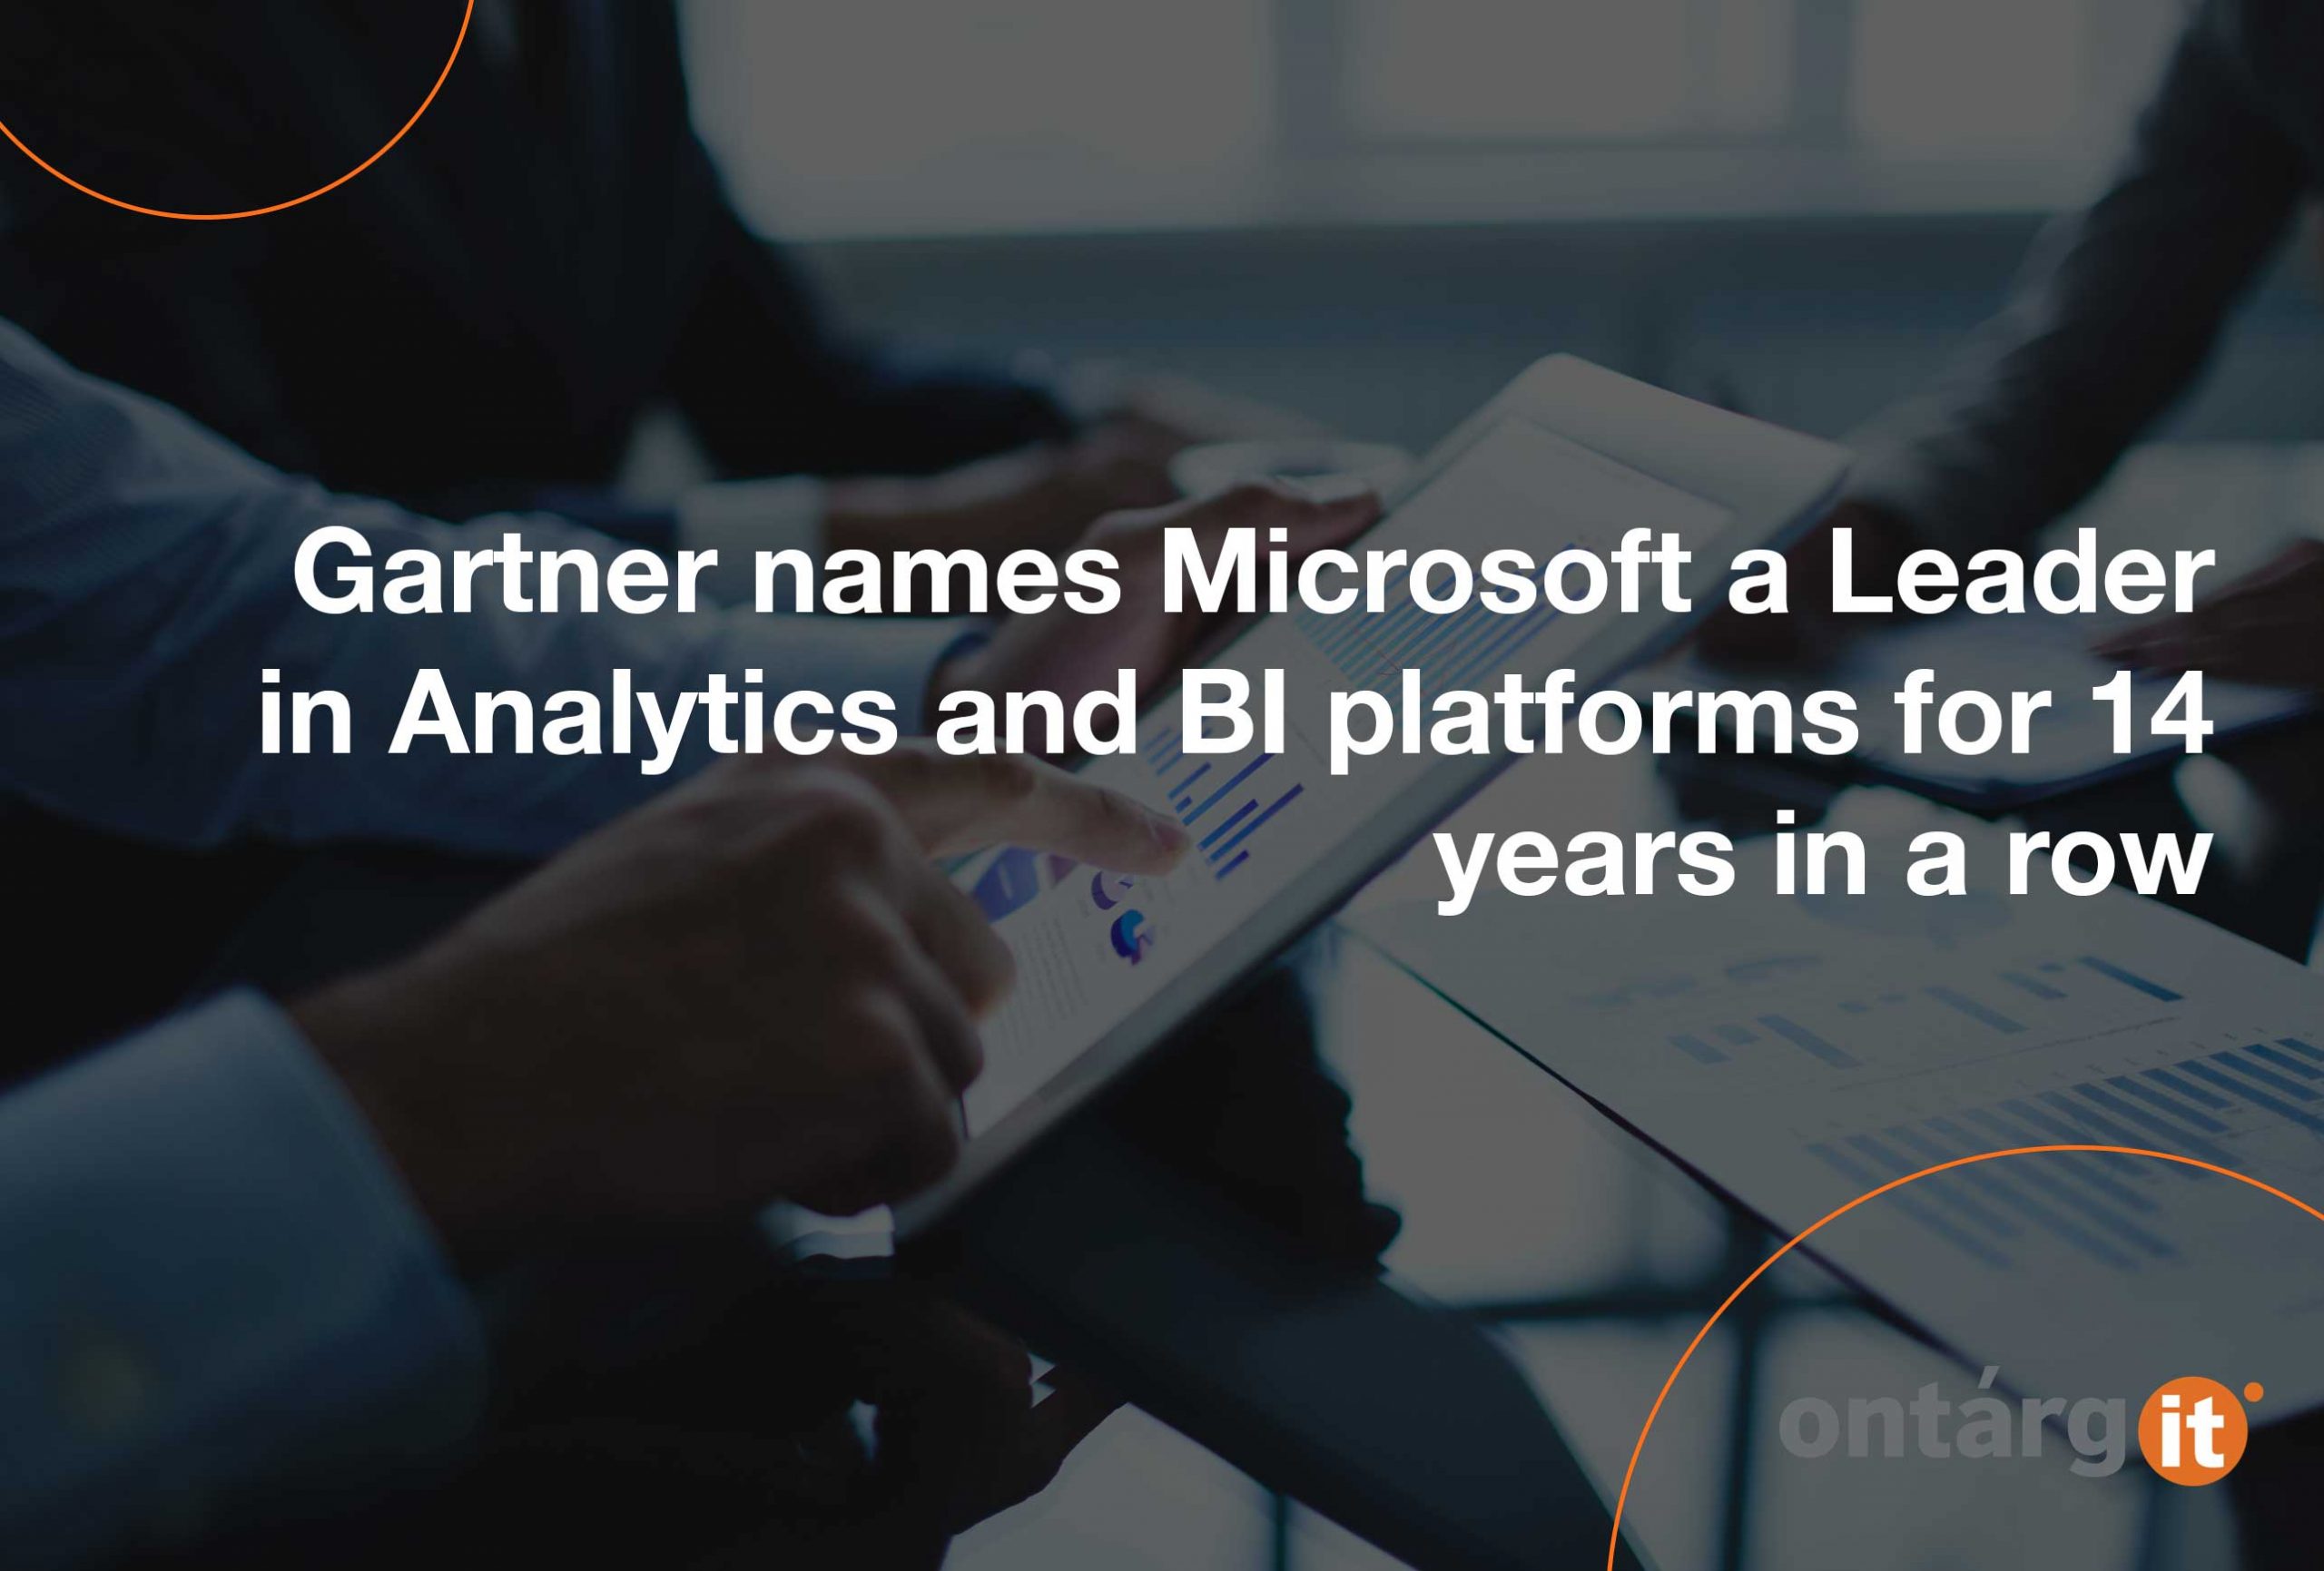 Gartner-names-Microsoft-a-Leader-in-Analytics-and-BI-platforms-for-14-years-in-a-row